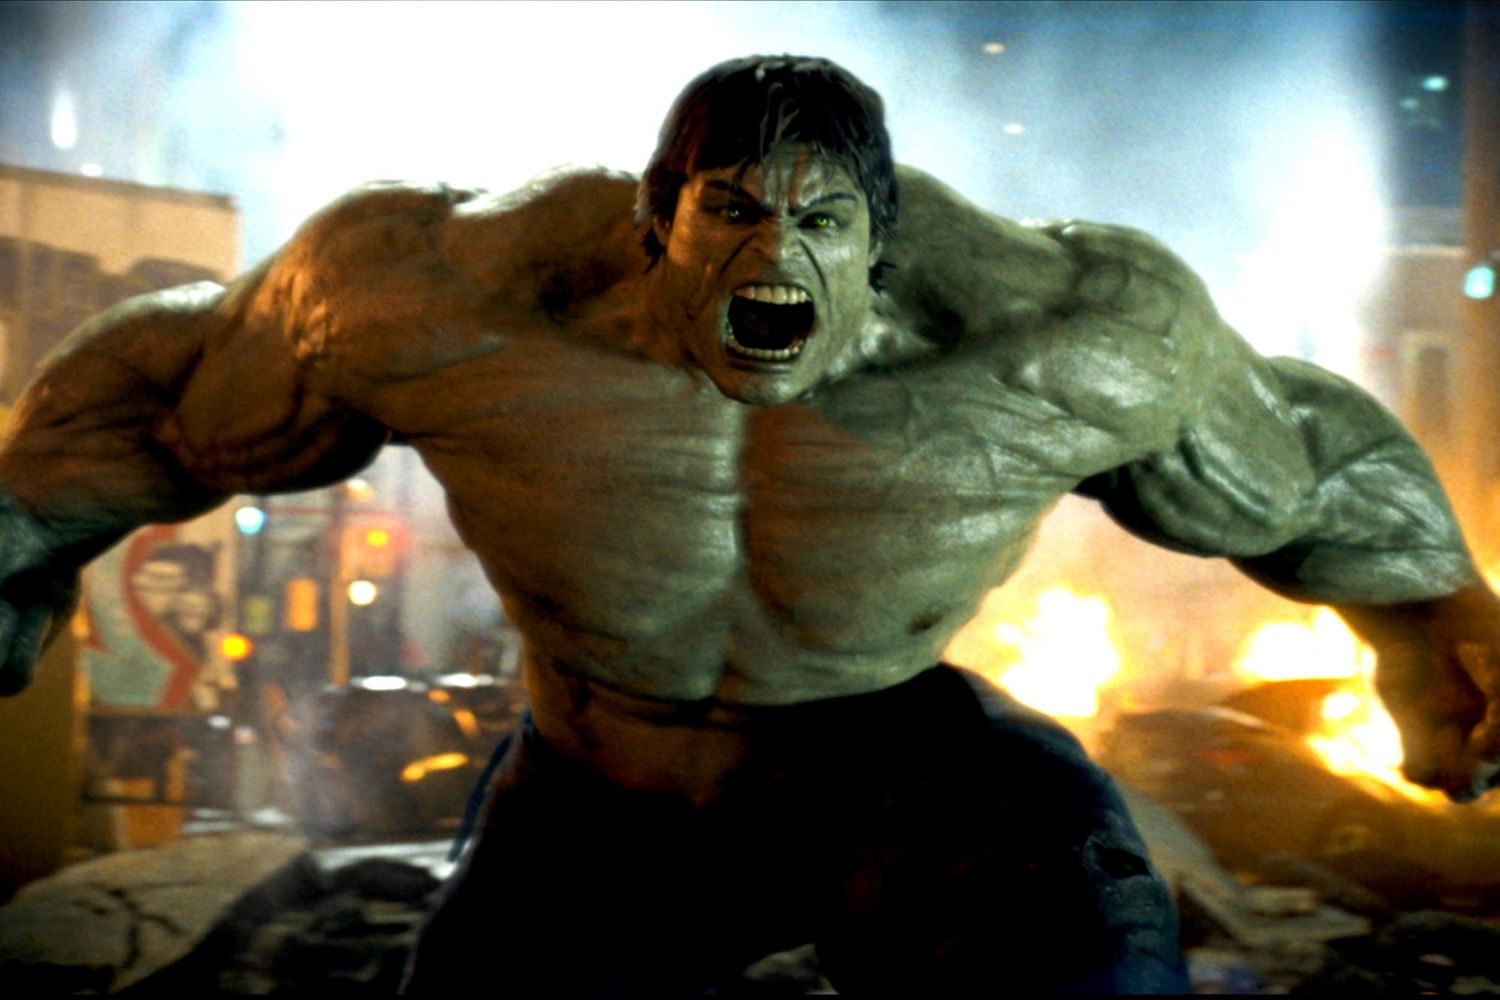 The Incredible Hulk 2008 Movie Mp4 Download (Latest English Movie)